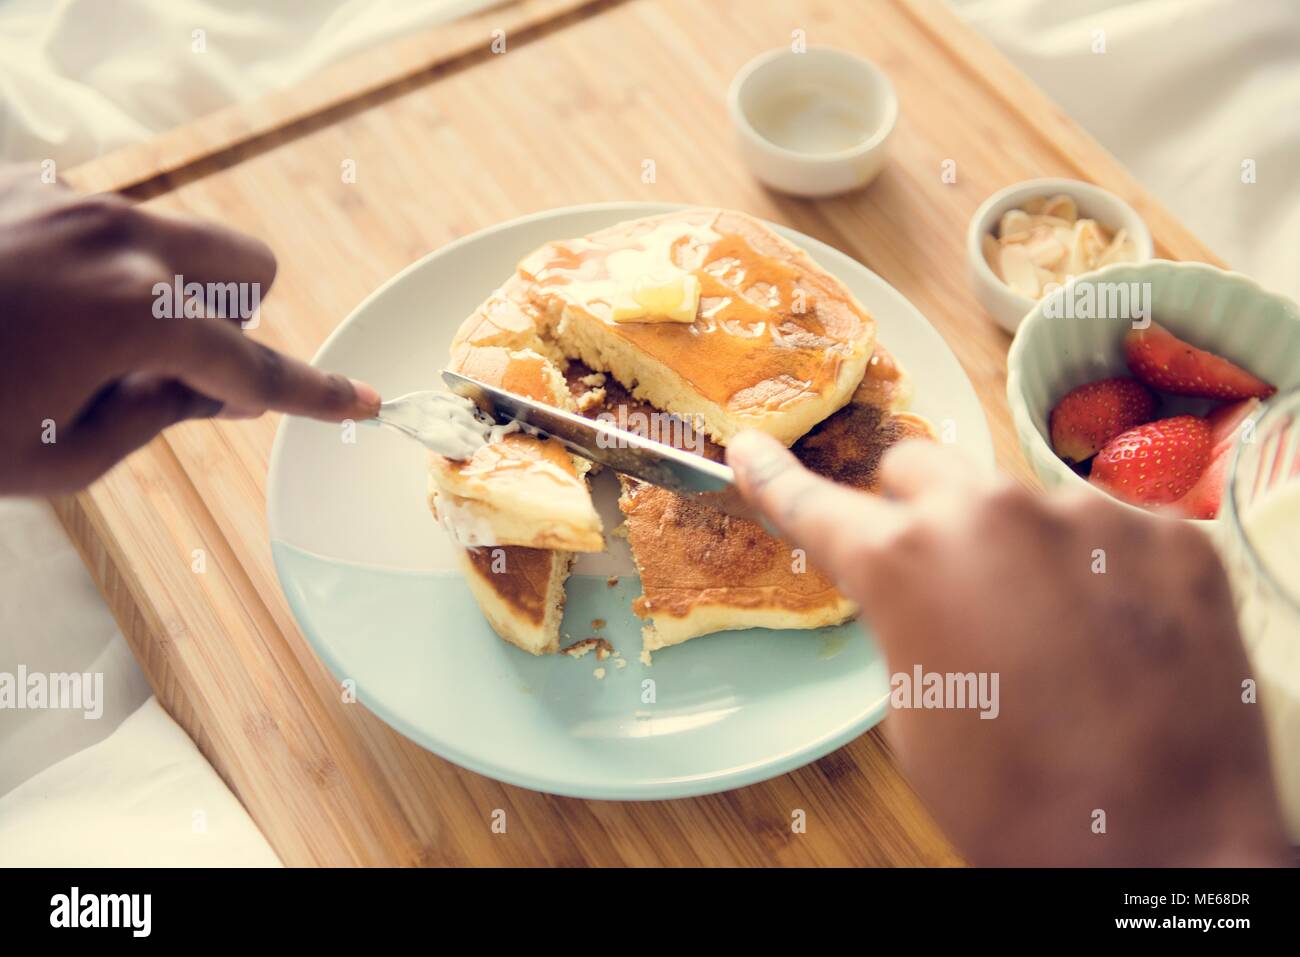 A person having breakfast in bed Stock Photo